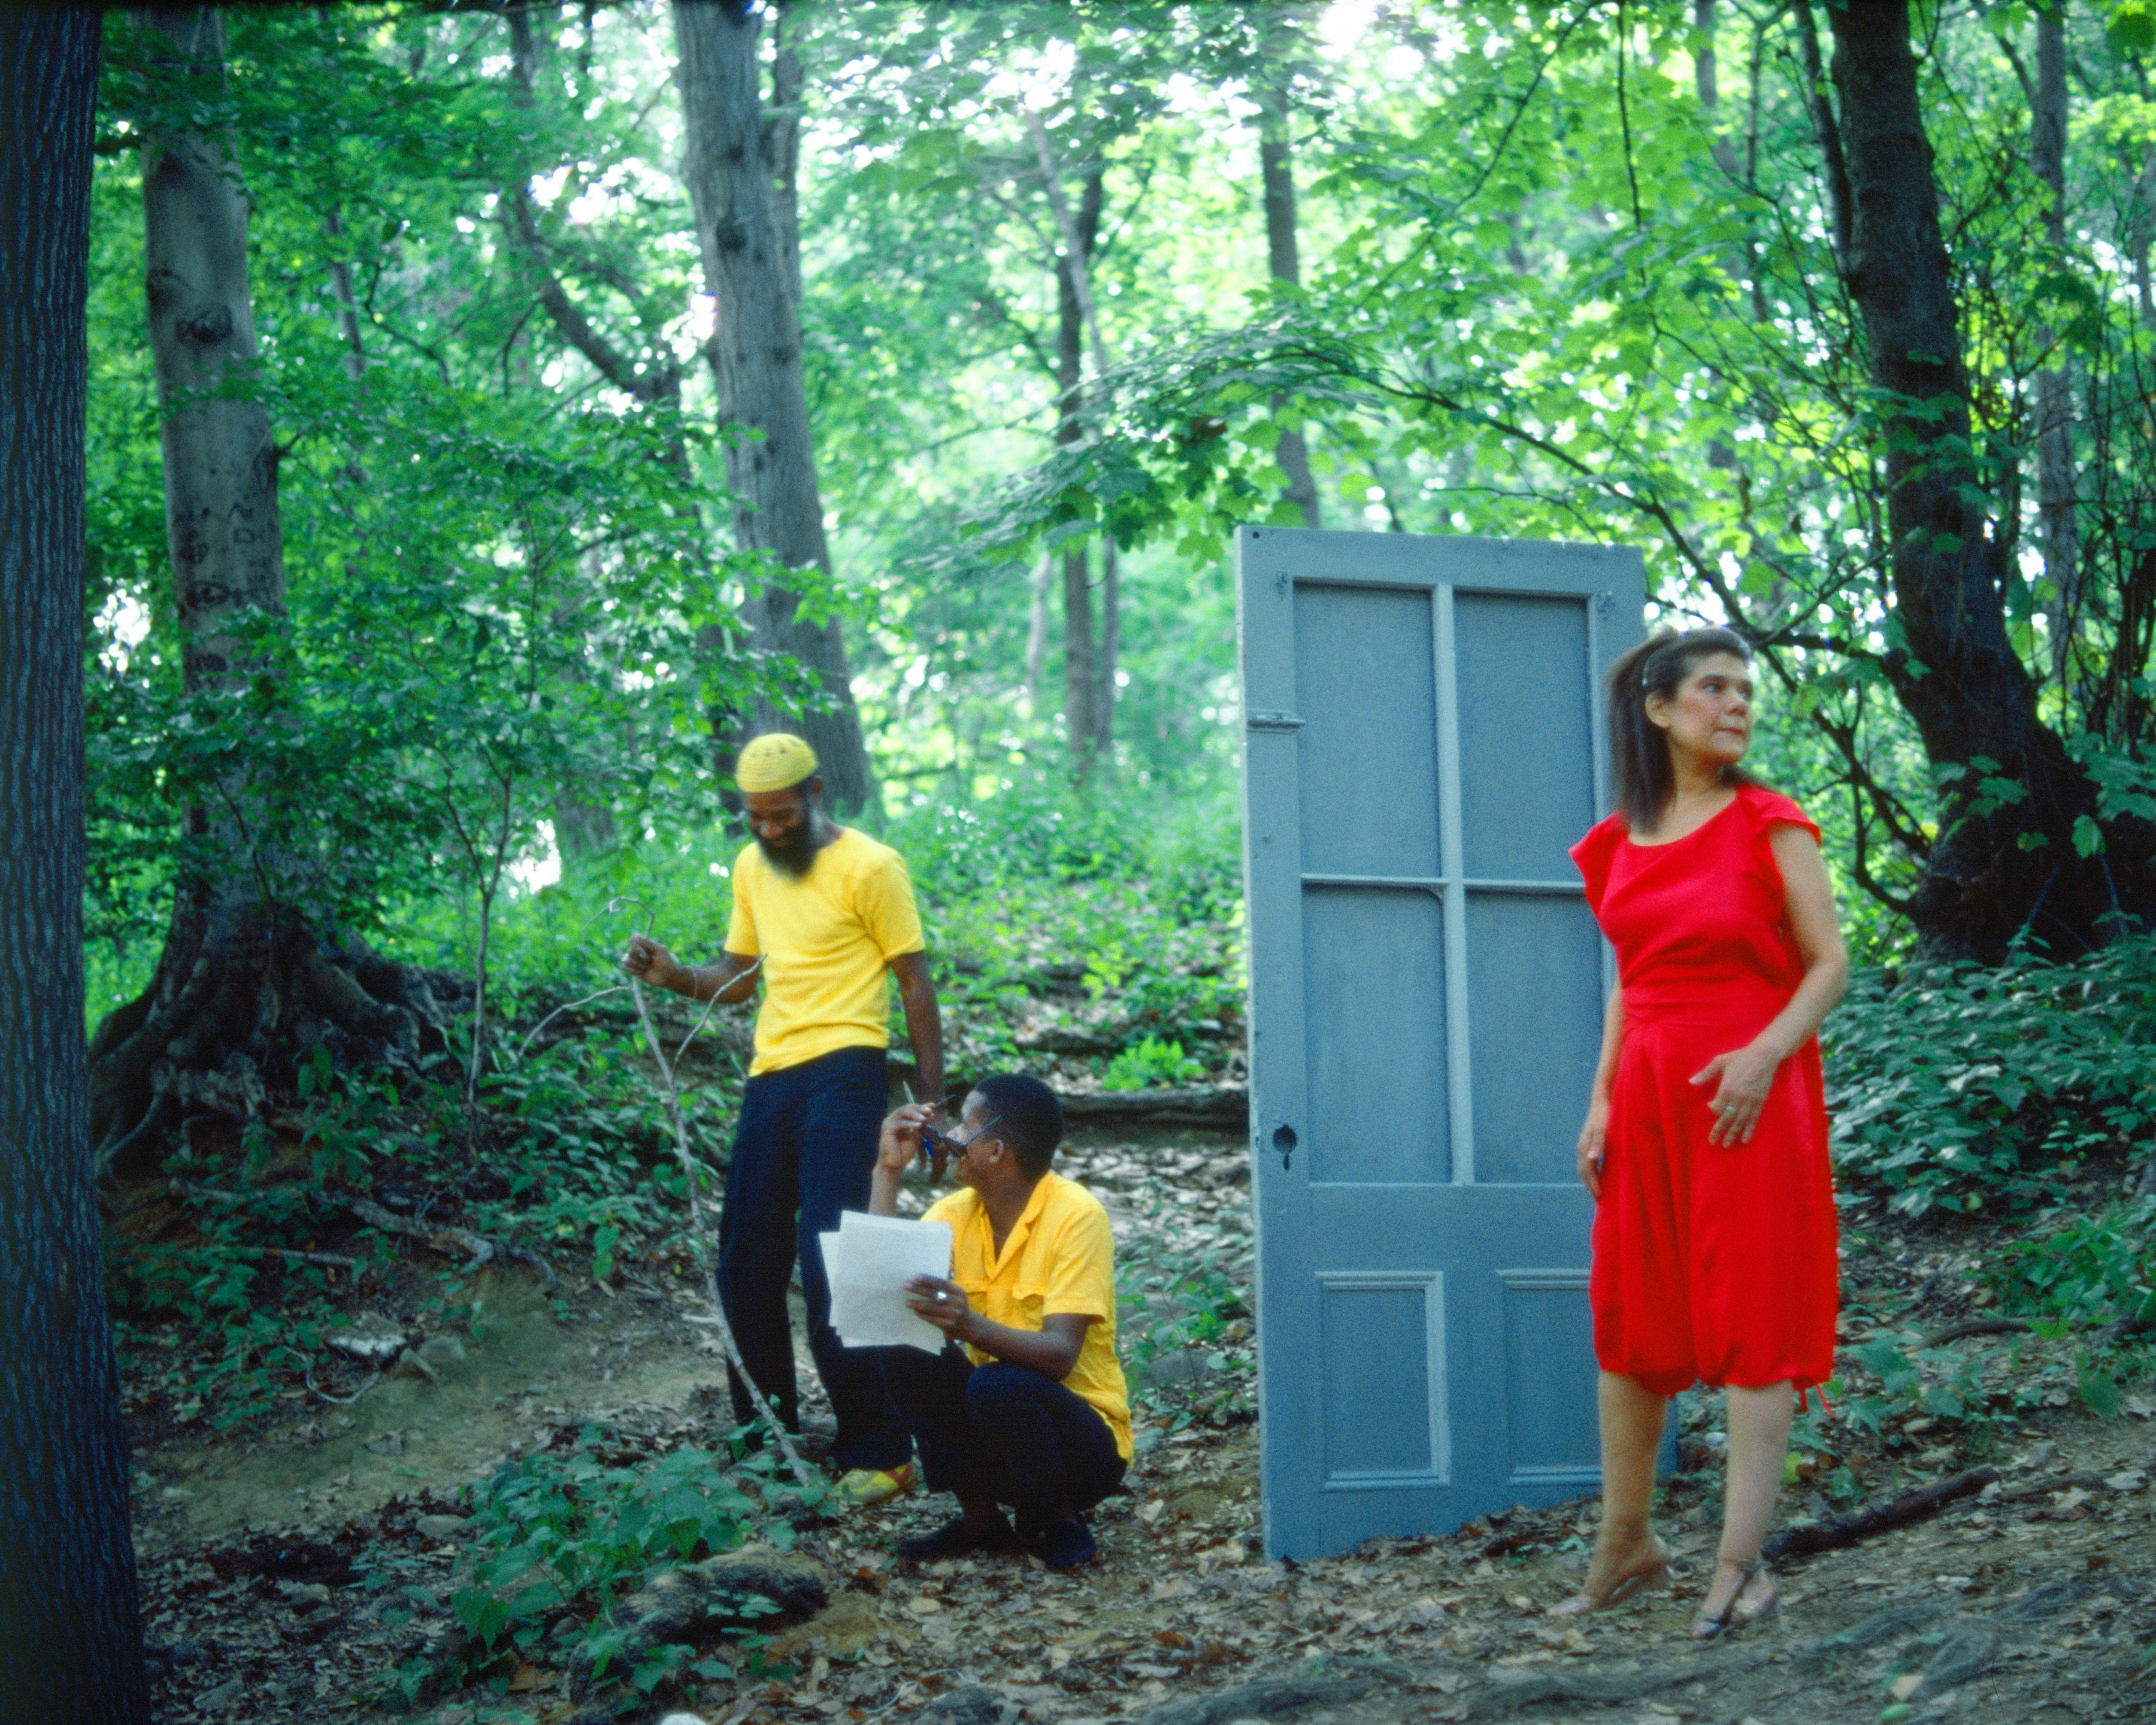 Lorraine O&#039;Grady, Rivers, First Draft: The Woman in Red hesitates outside after the Black Male Artists in Yellow eject her, 1982/2015